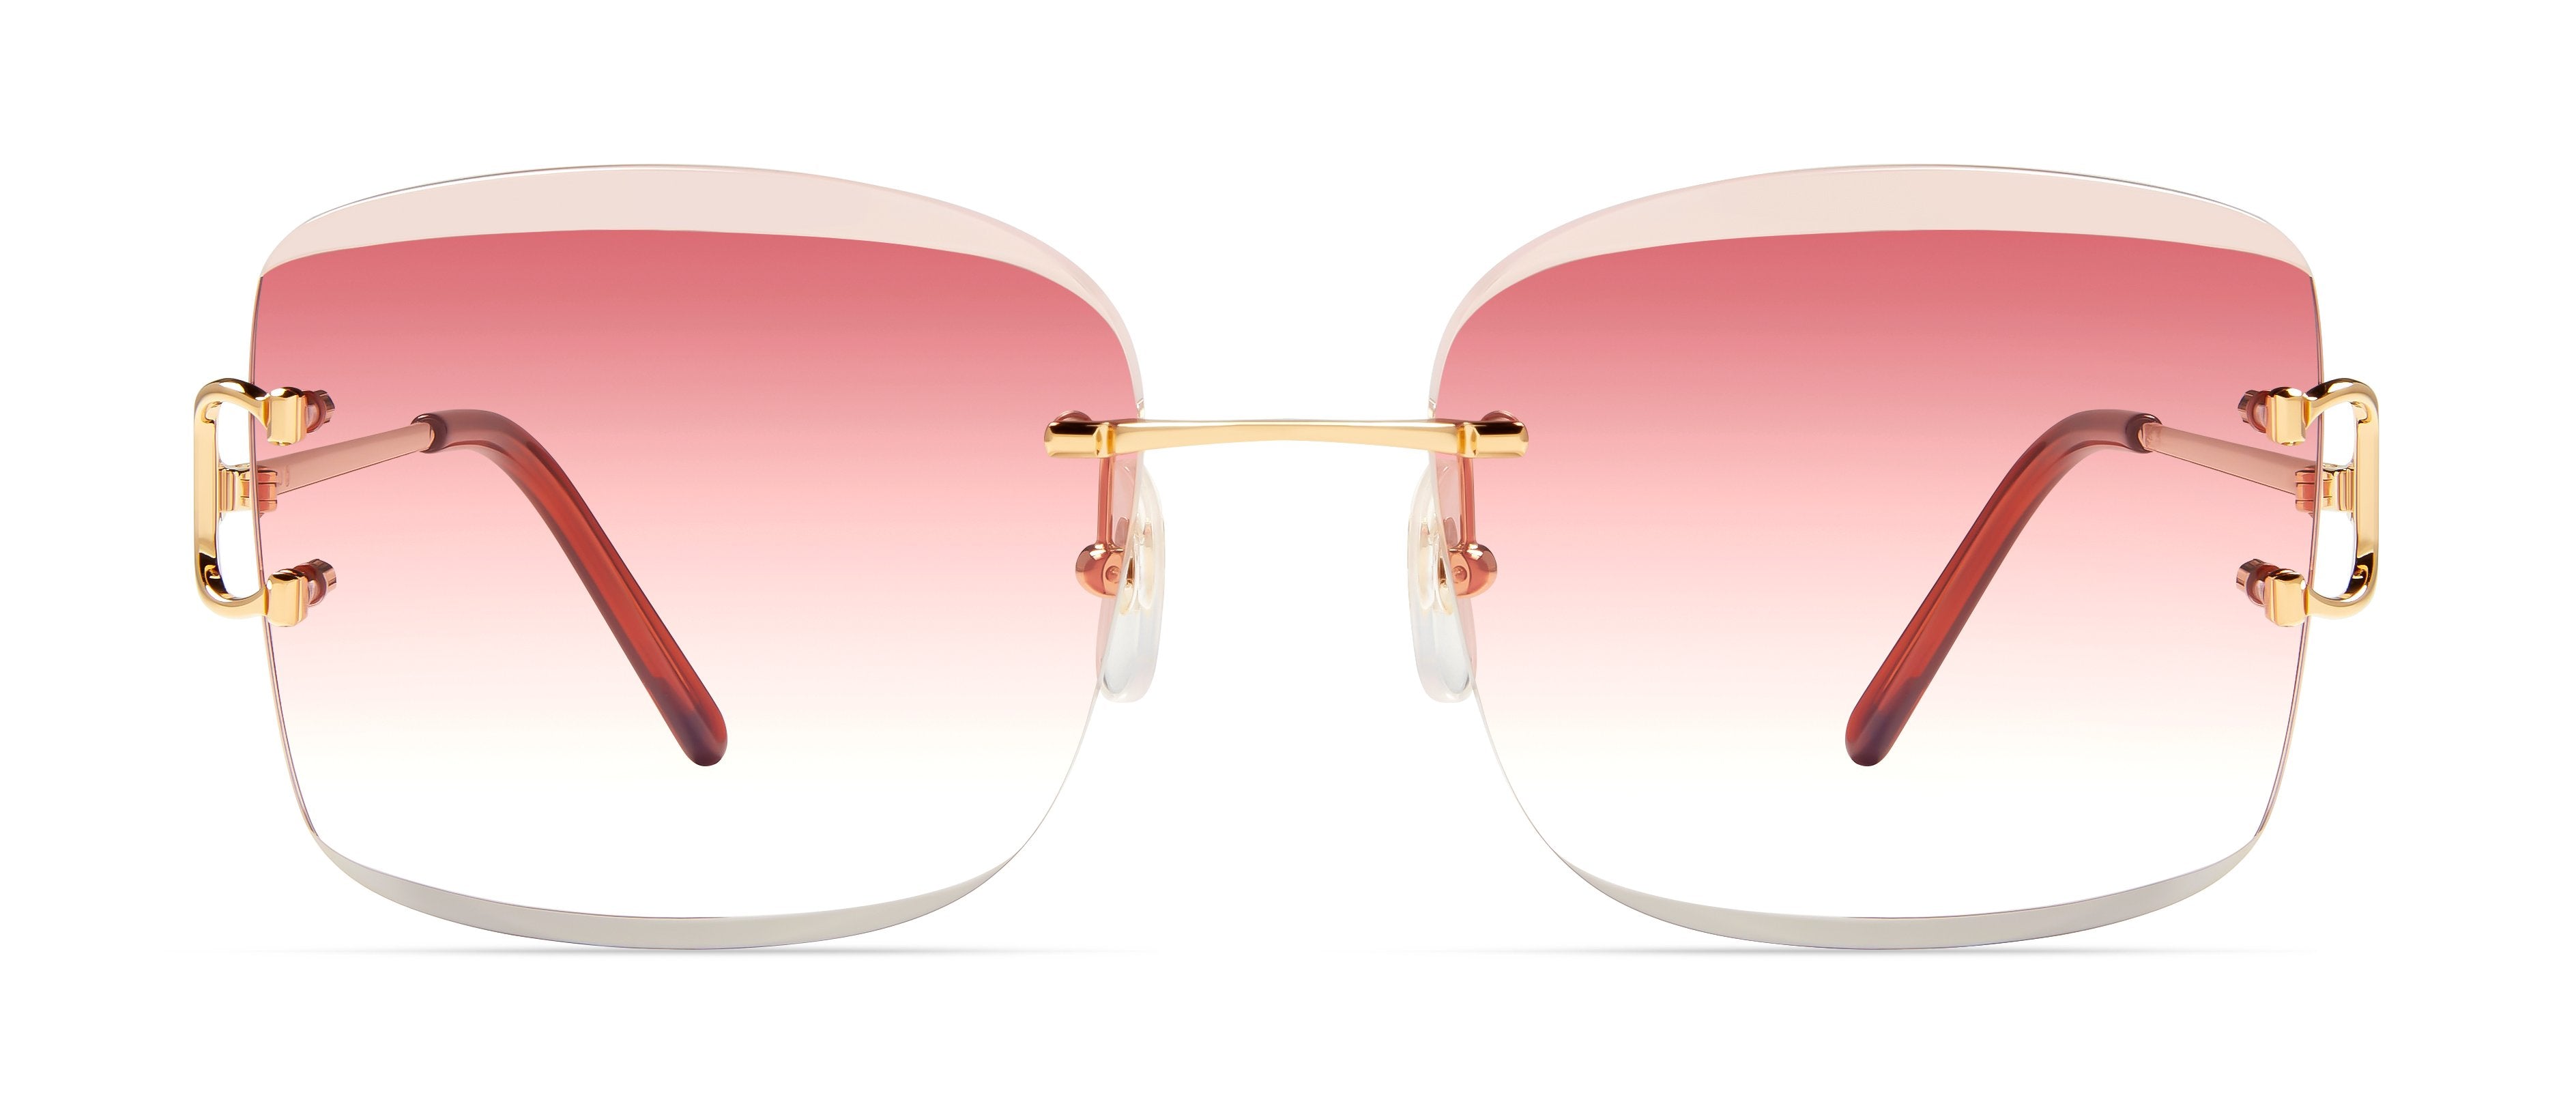 Big Square Faceted Geometric Sunglasses Man Woman Pink Gold 